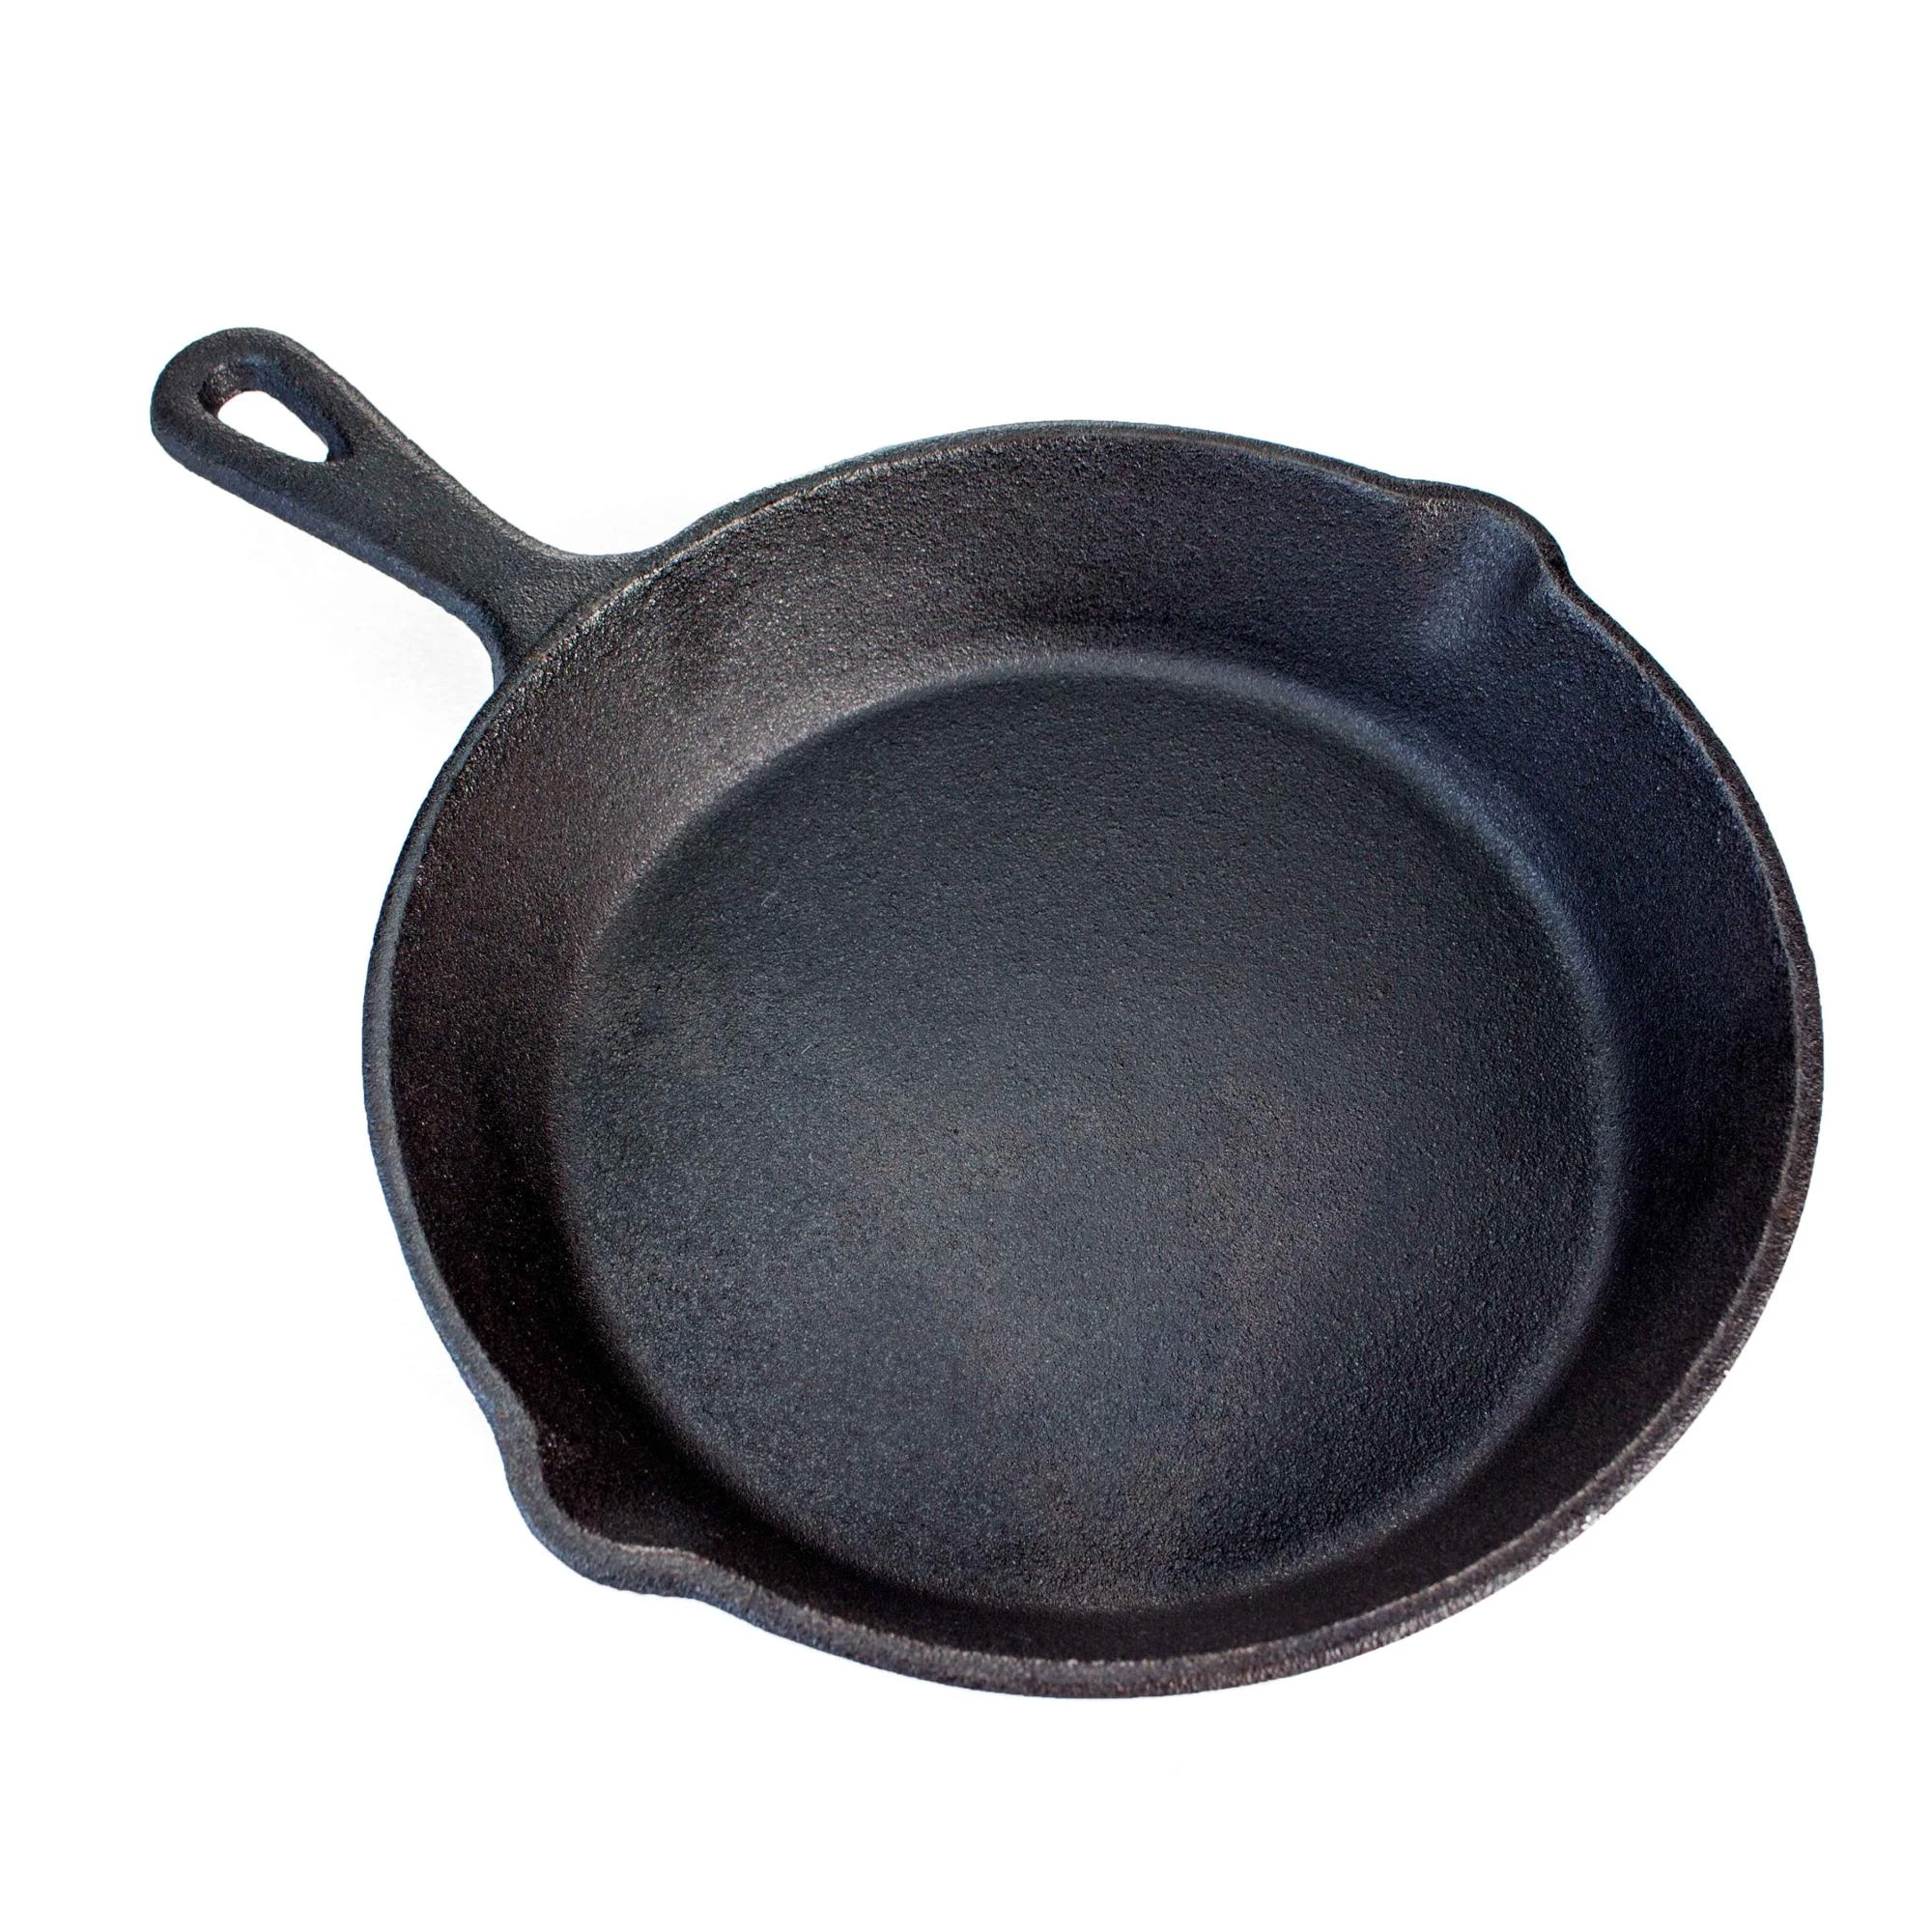 Useful Home And Commerical Cookware Nonstick Cast Iron Skillet With A Sturdy Handle